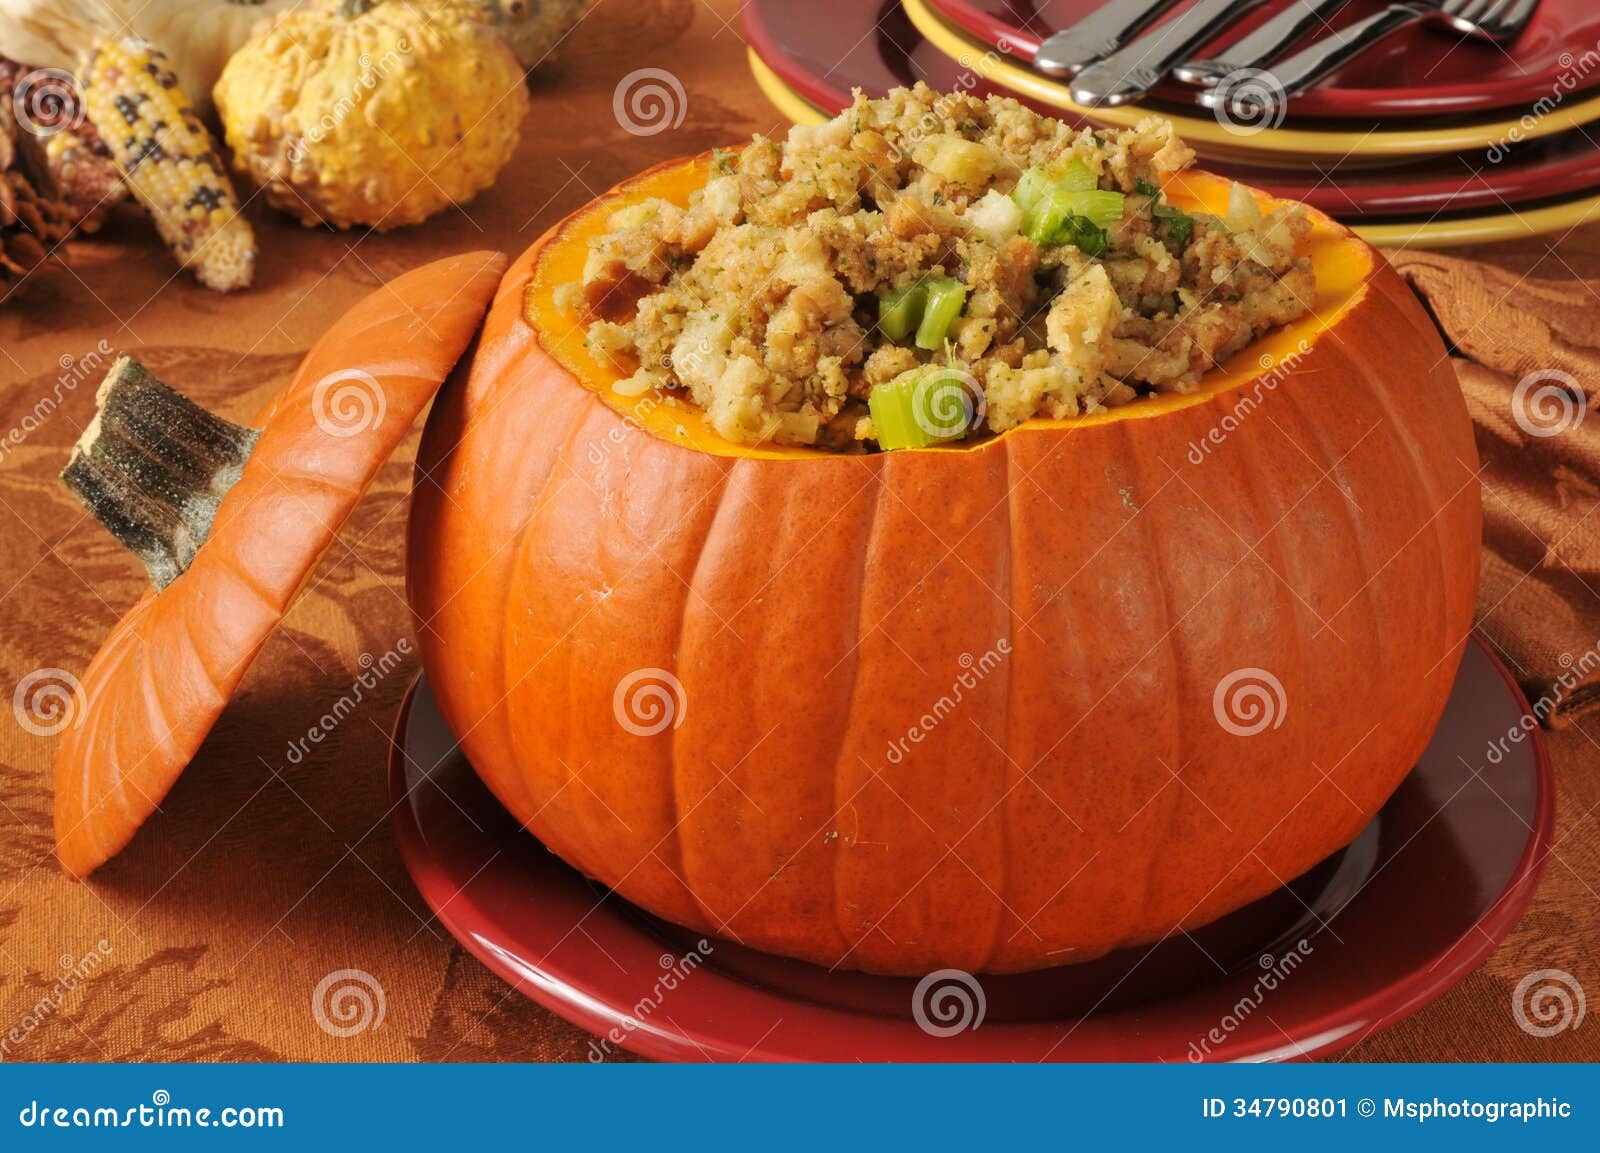 Turkey and Celery Stuffing in a Pumpkin Stock Image - Image of holiday ...